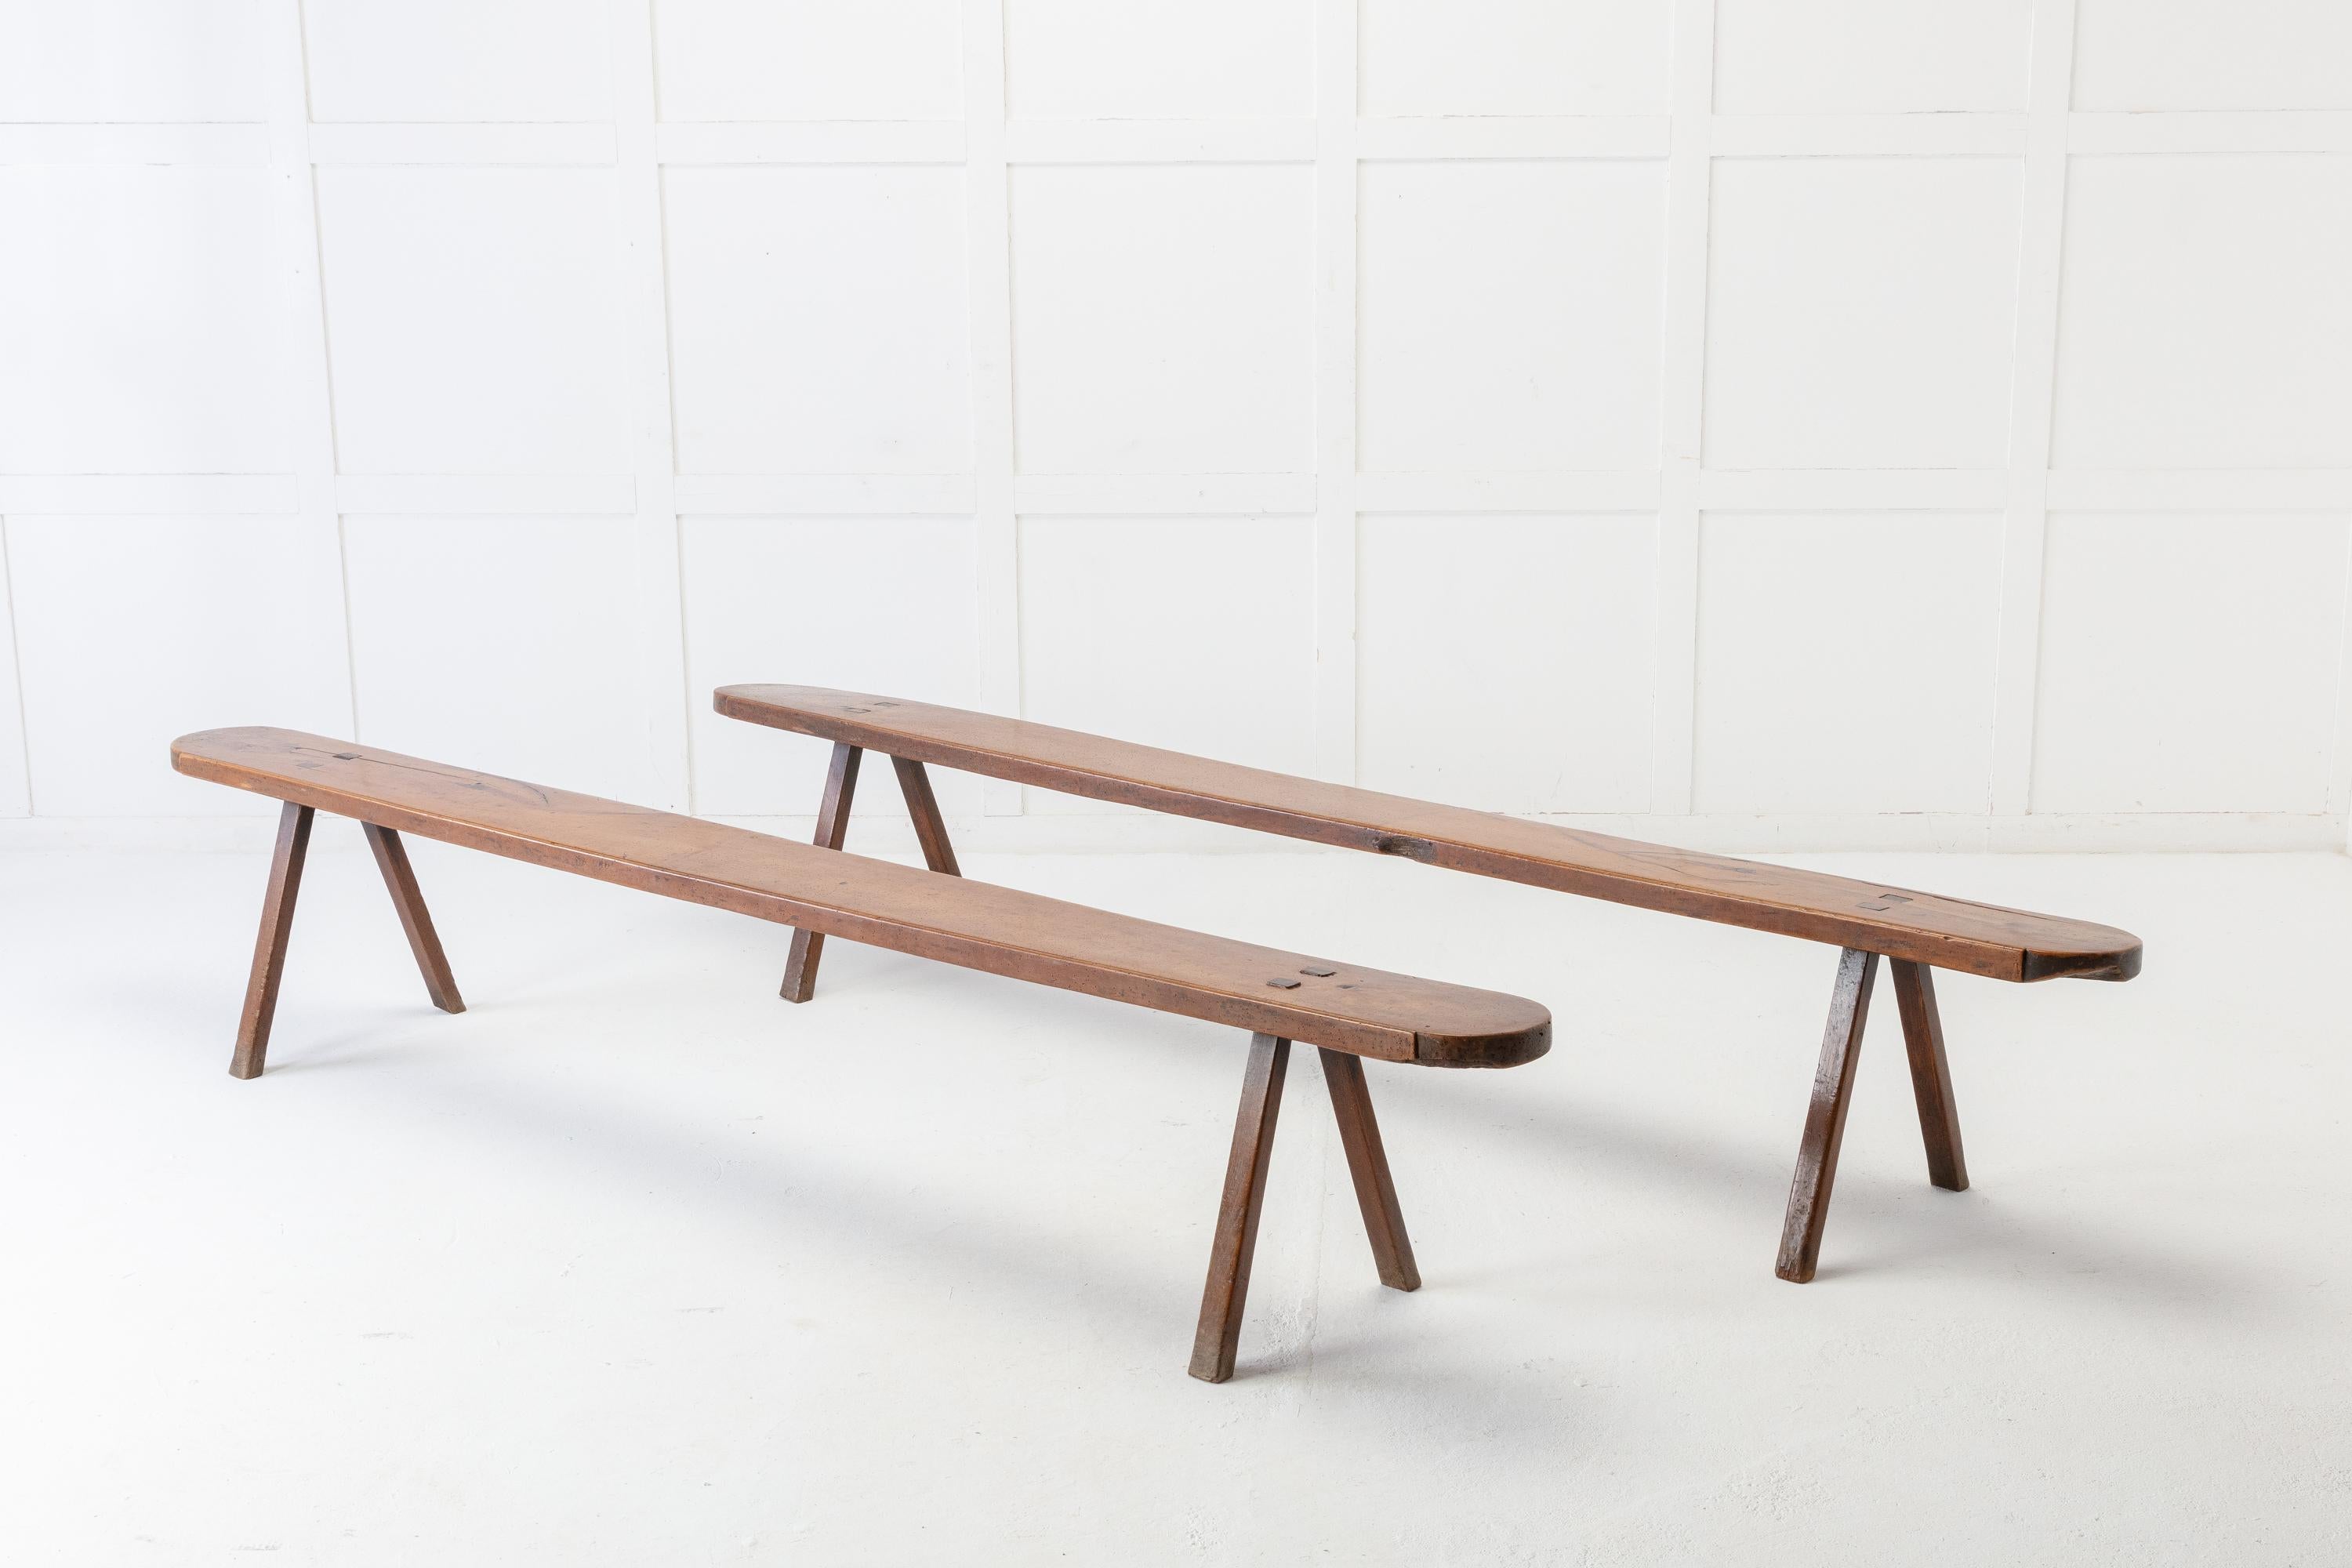 Pair of 18th century walnut benches, having a wonderful rich colour. A practical and simple seating solution.
 